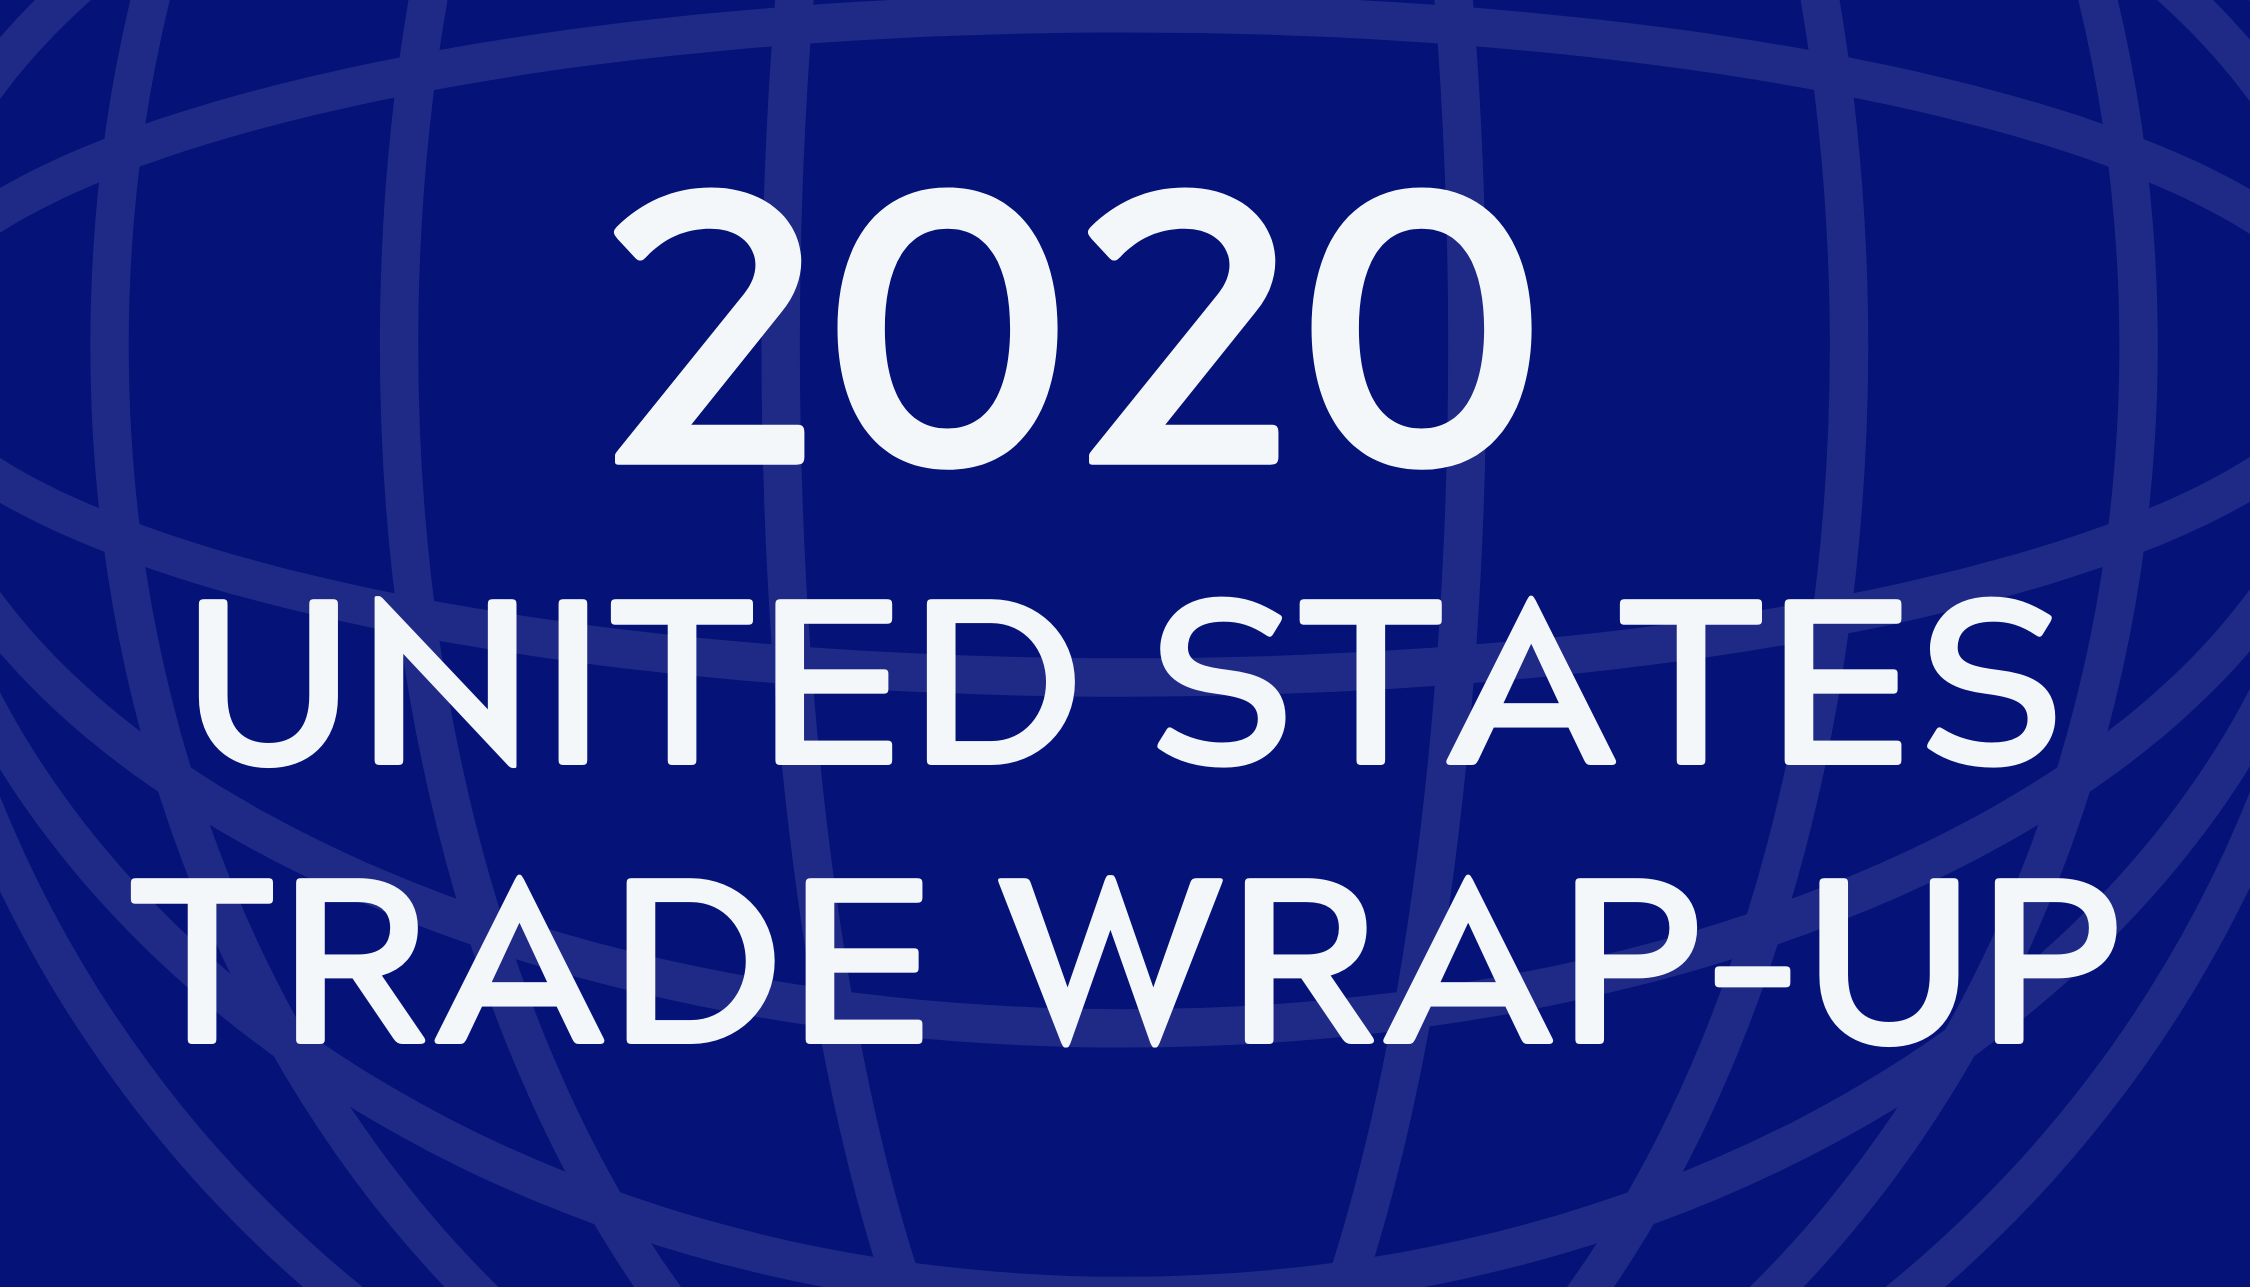 2020 United States Trade Wrap-Up